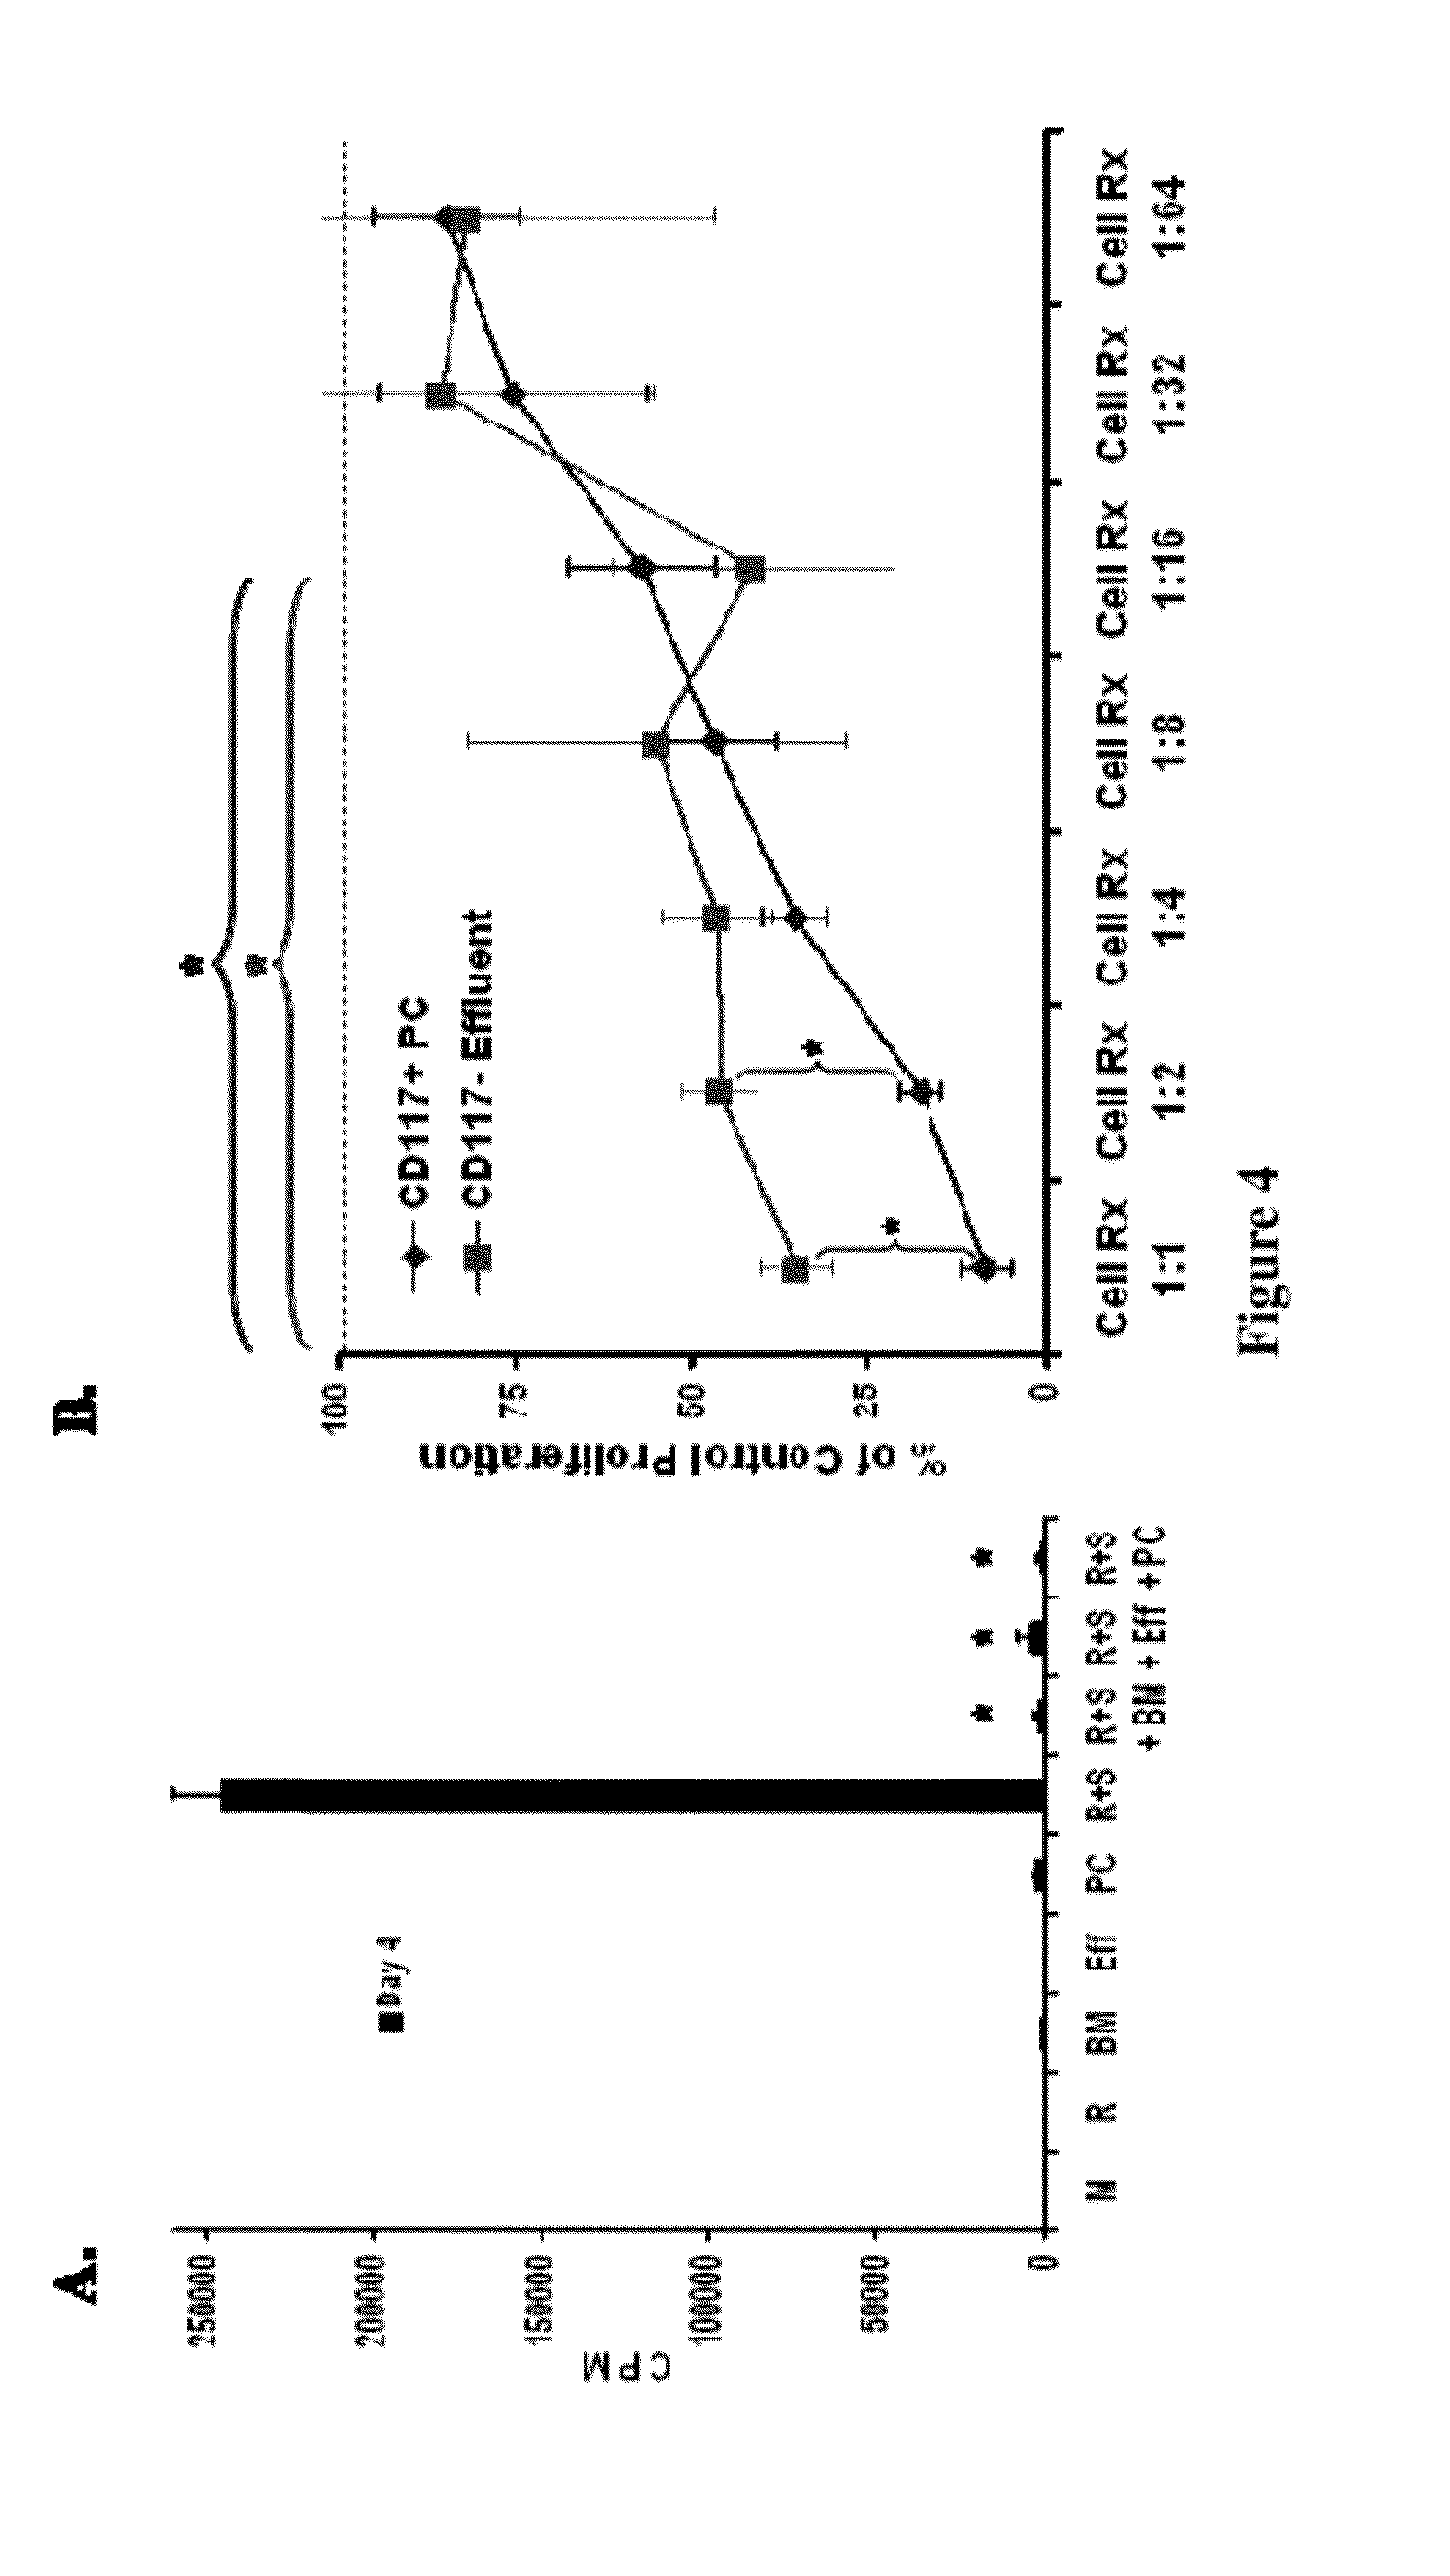 CD117+ Cells and Uses Thereof